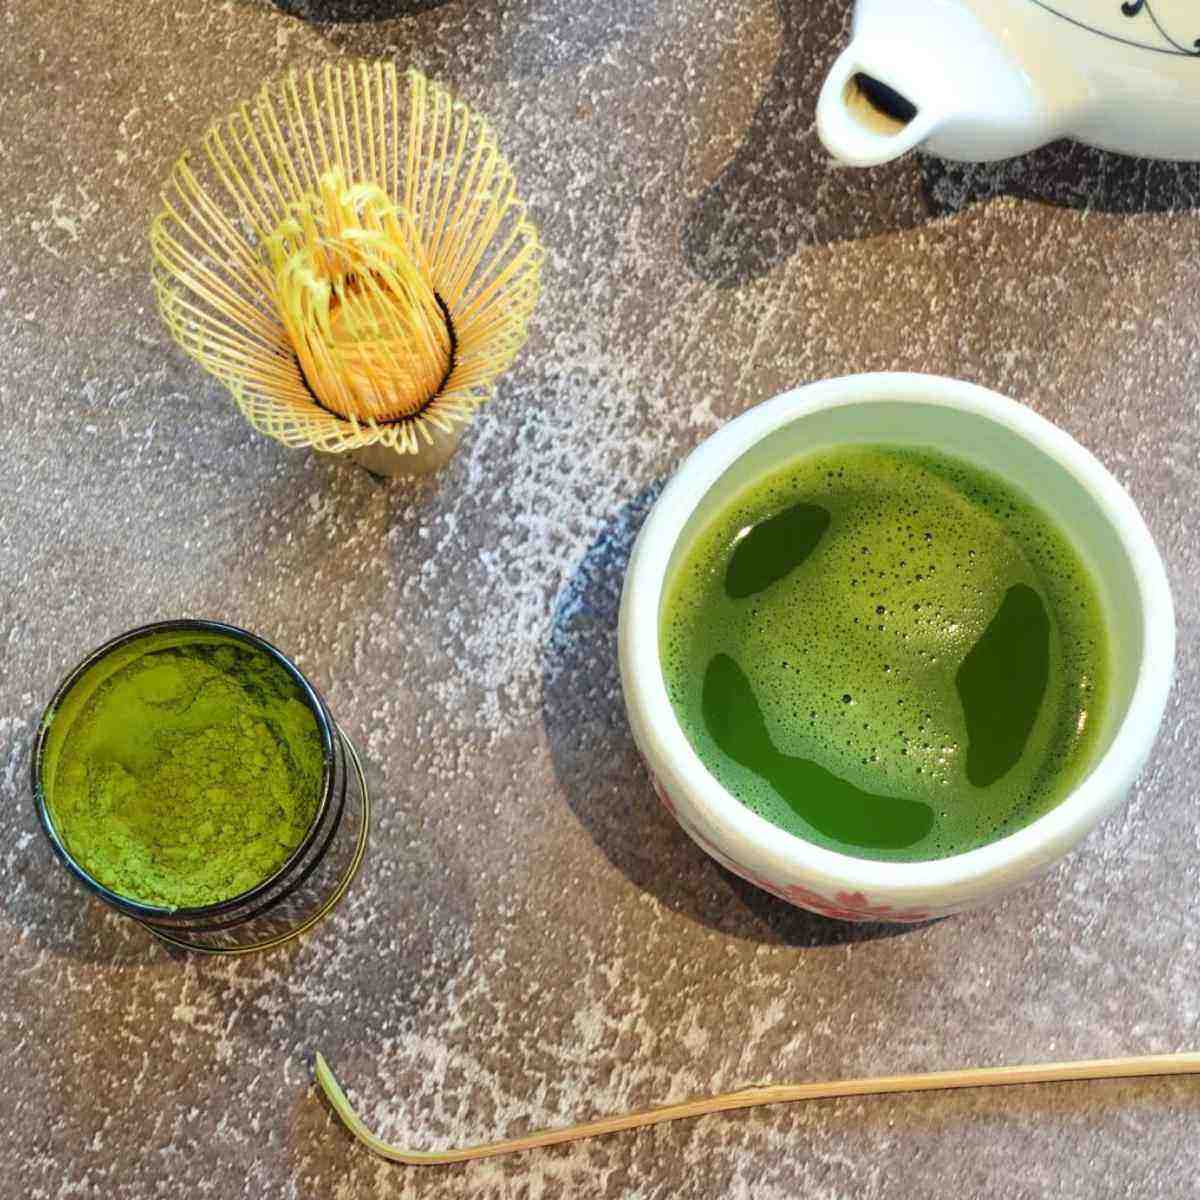 Here are all the tools commonly used when making matcha